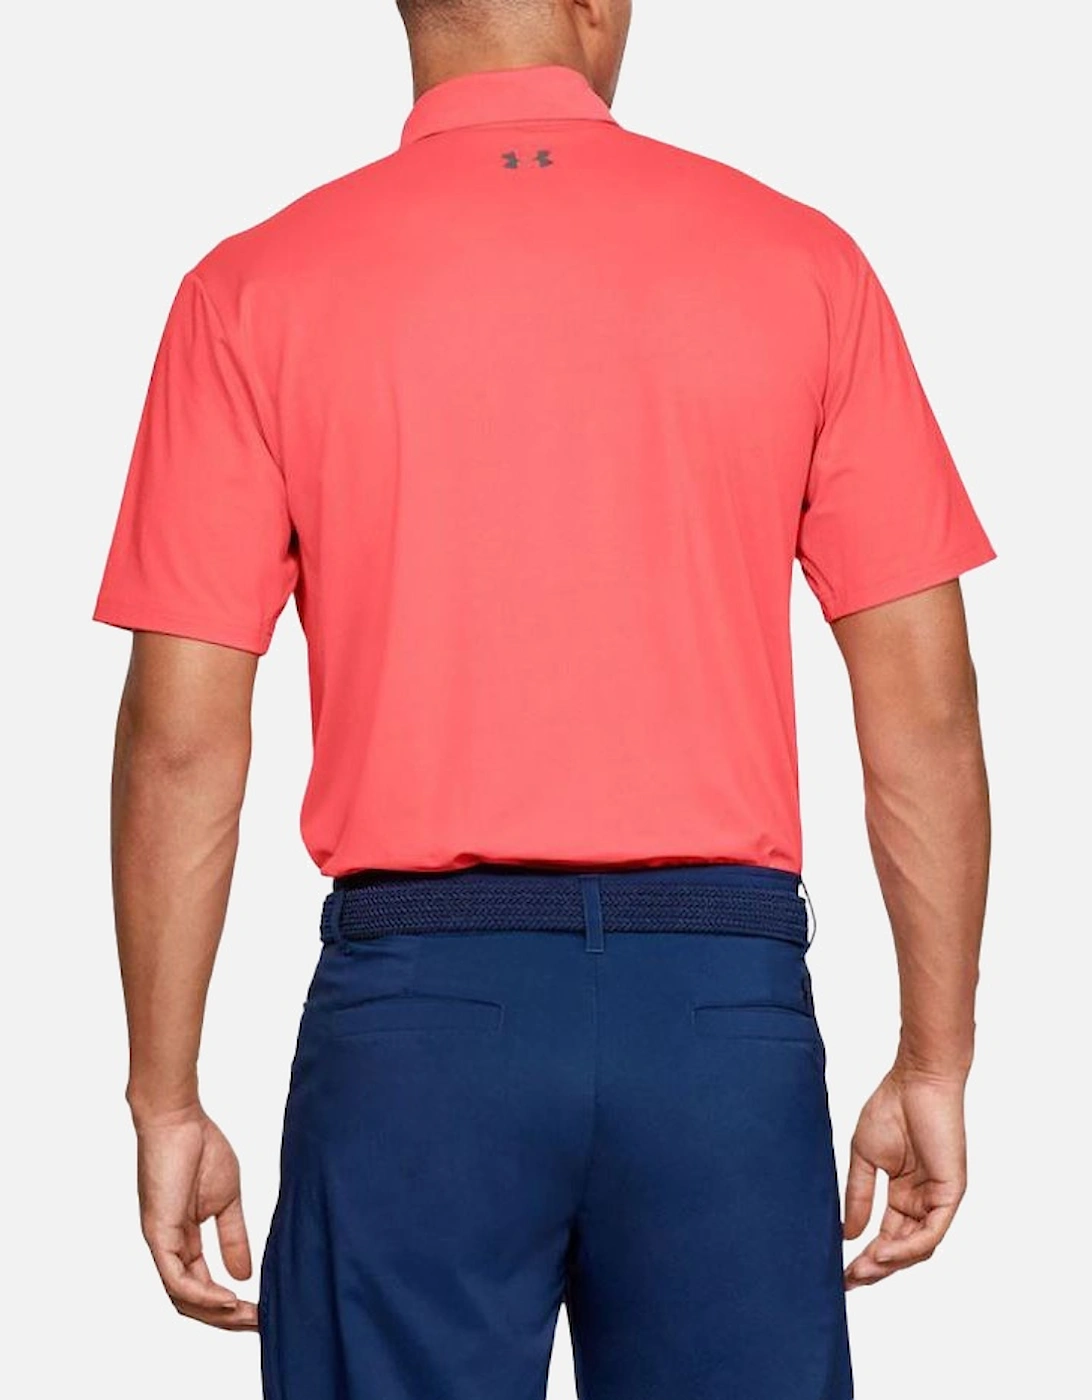 Mens Performance Polo 2.0 (Red)